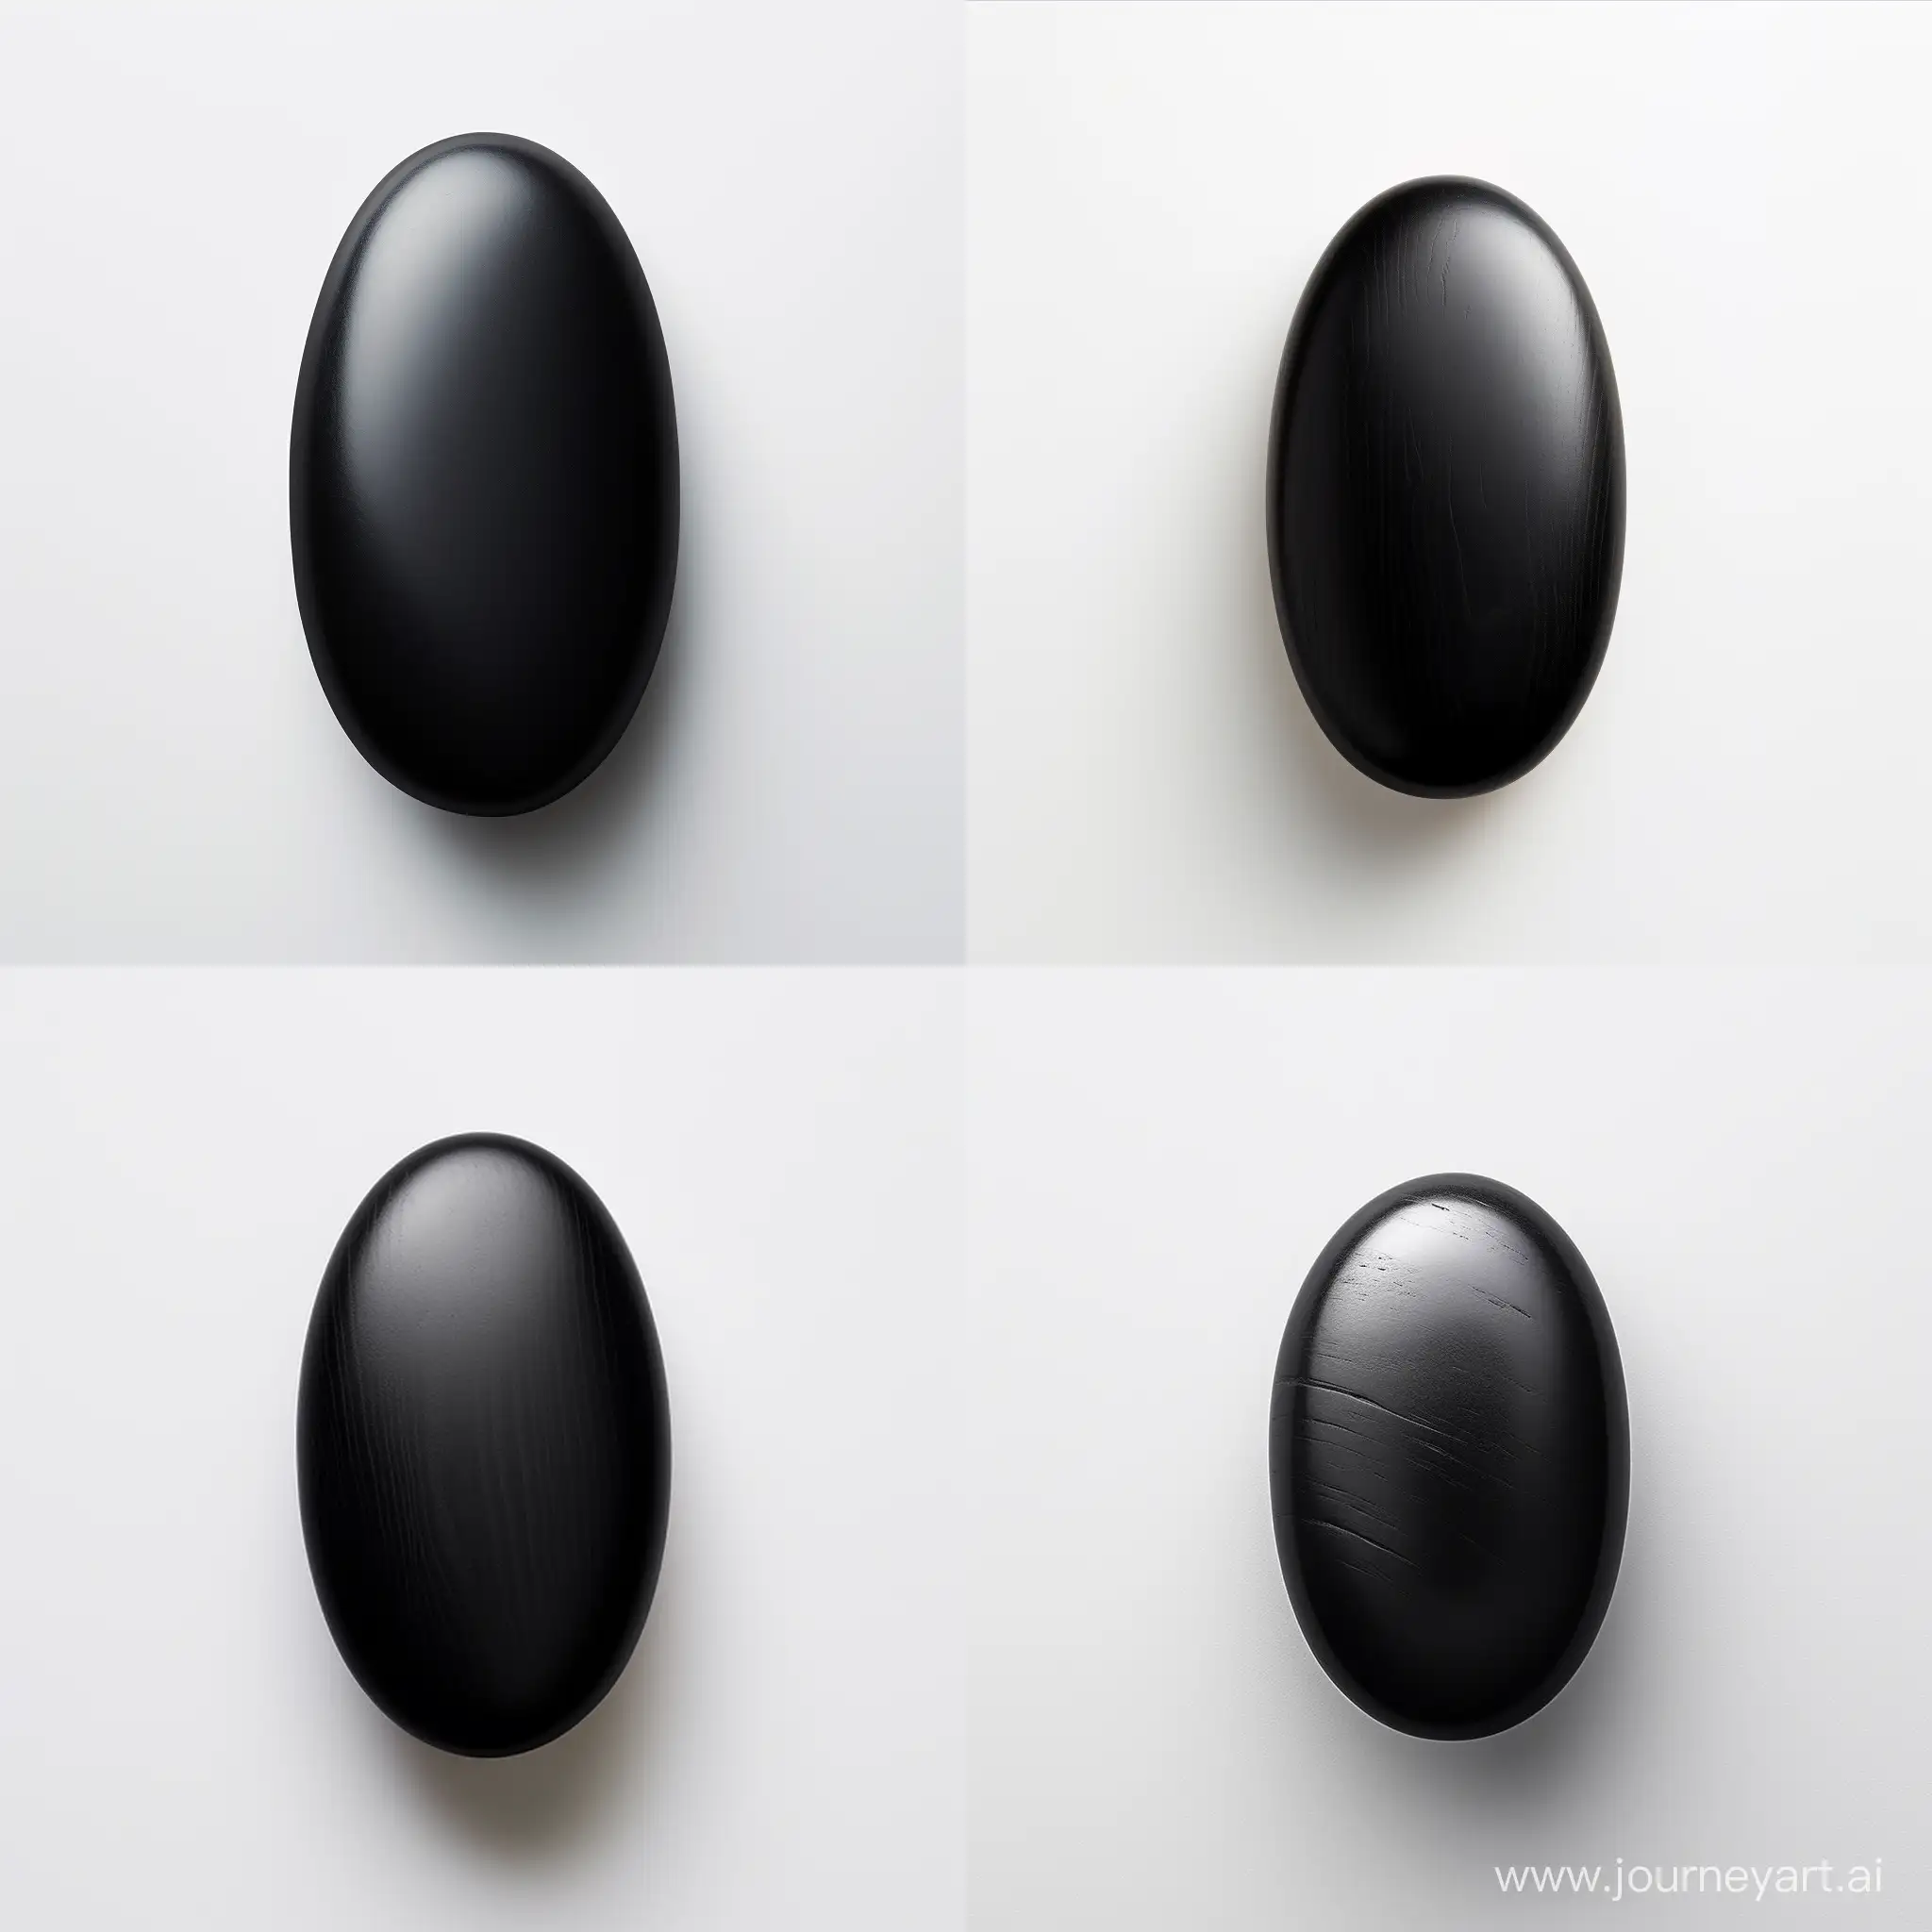 Beautiful solid stone + oval shape + one piece+ dark black color + matte texture +plain + slightly elongated horizontally + polished cabochon + medium size +on a white background +view of the stone from above + on a light background
